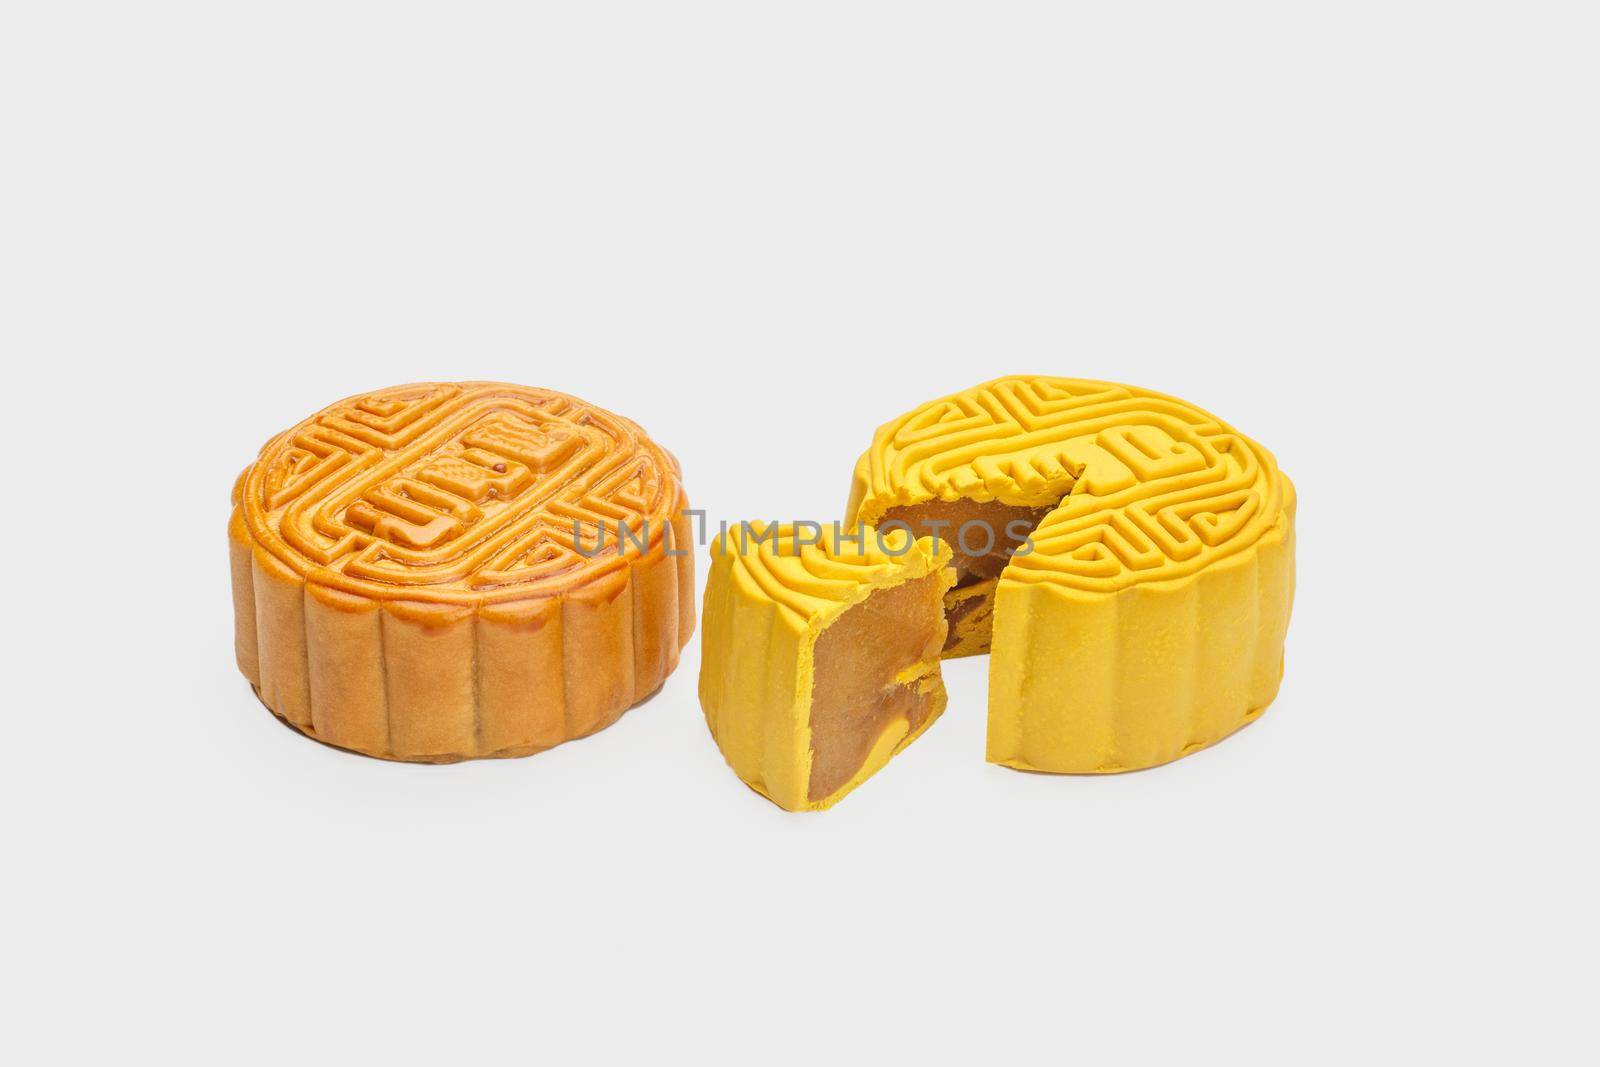 Traditional mooncake with durian and nuts filling on white background by toa55